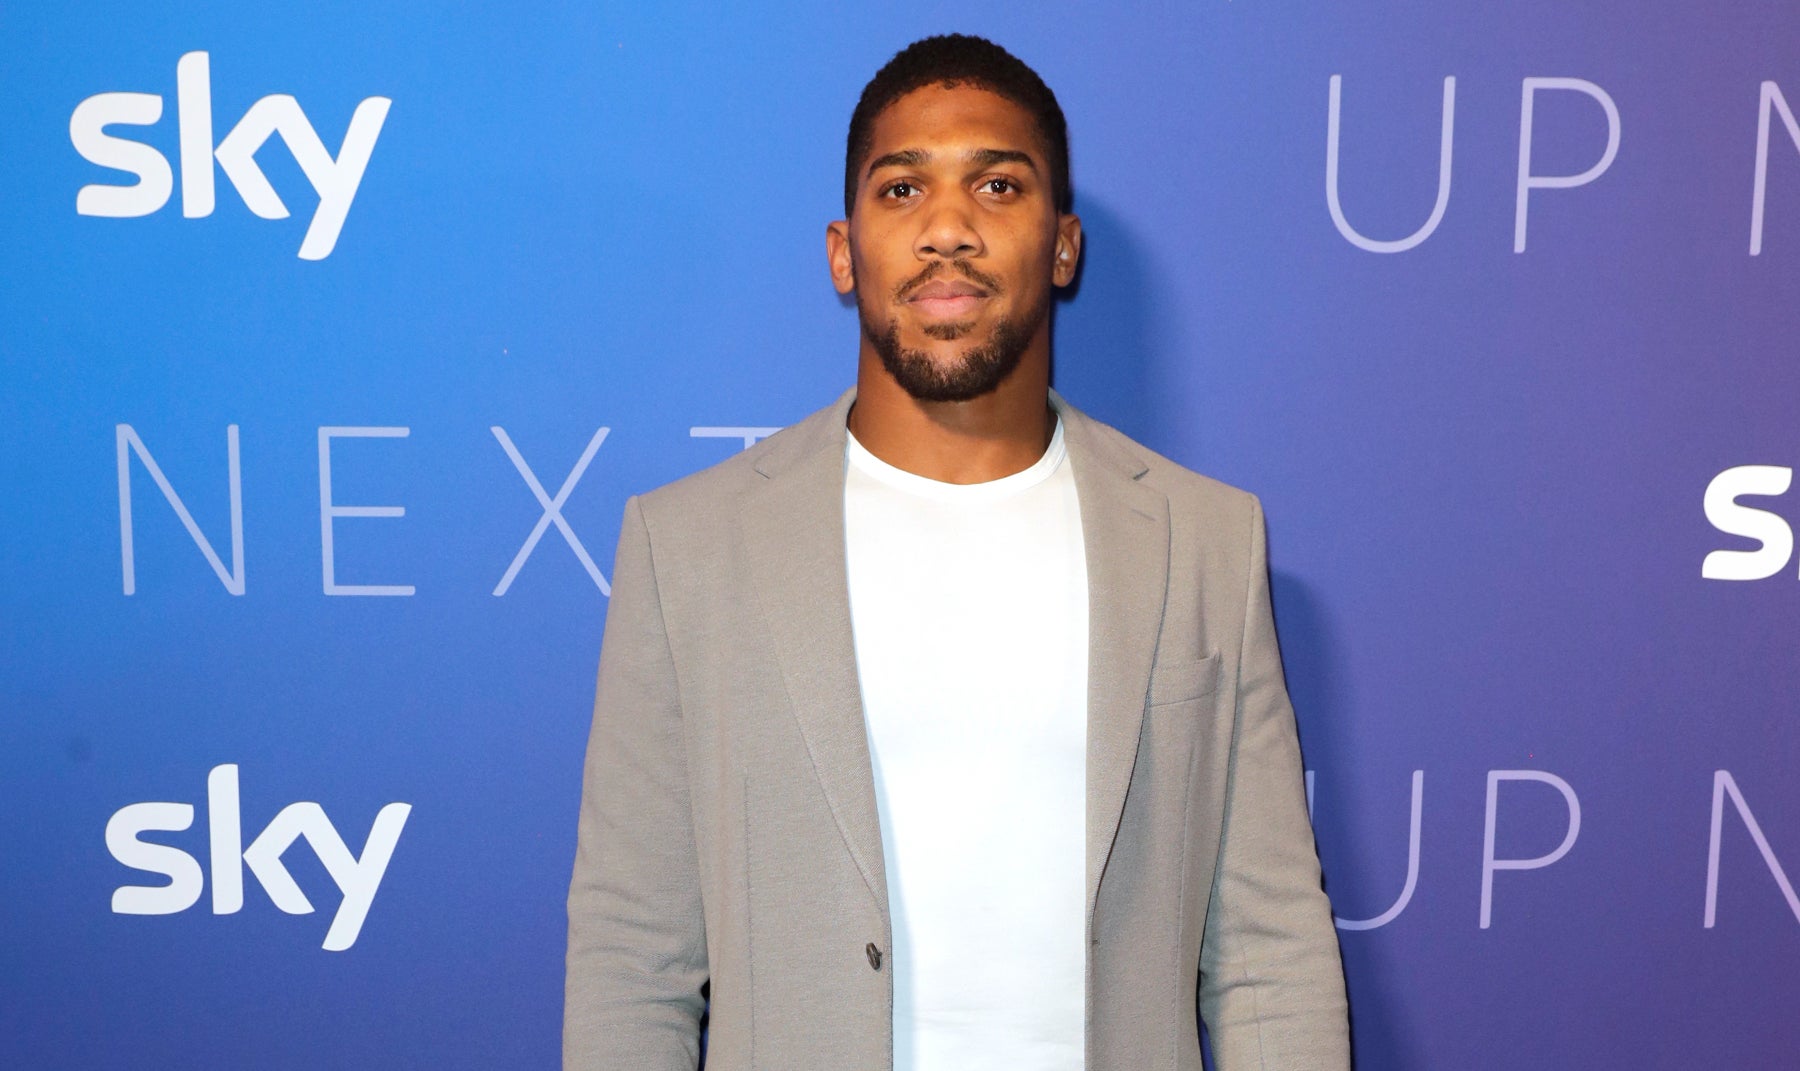 Joshua leaves Sky for long-term deal with DAZN